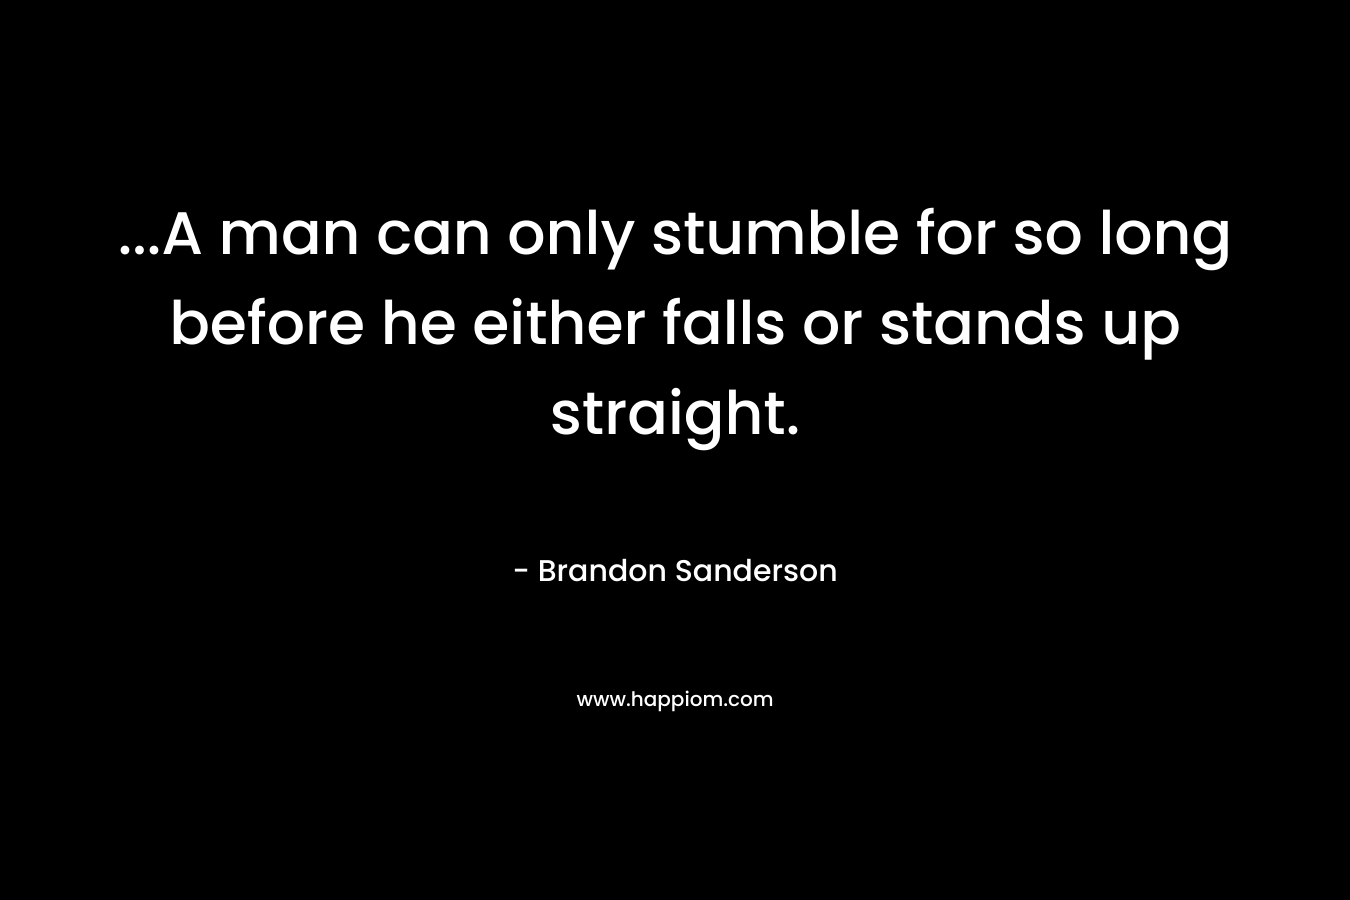 ...A man can only stumble for so long before he either falls or stands up straight.